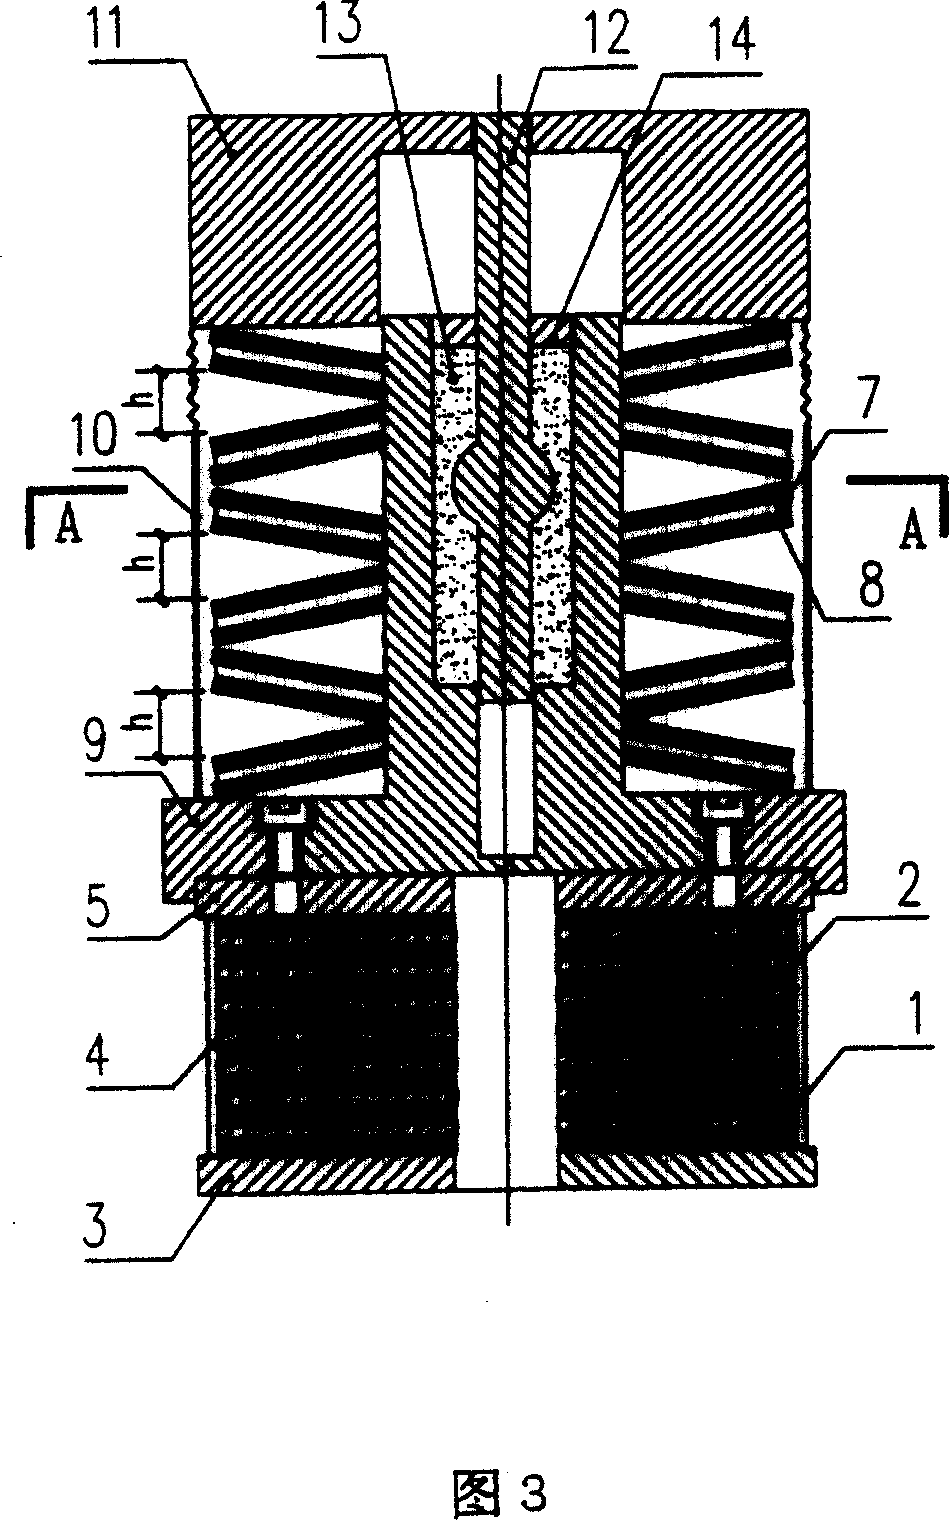 Three-dimemsional vibration insulationg system